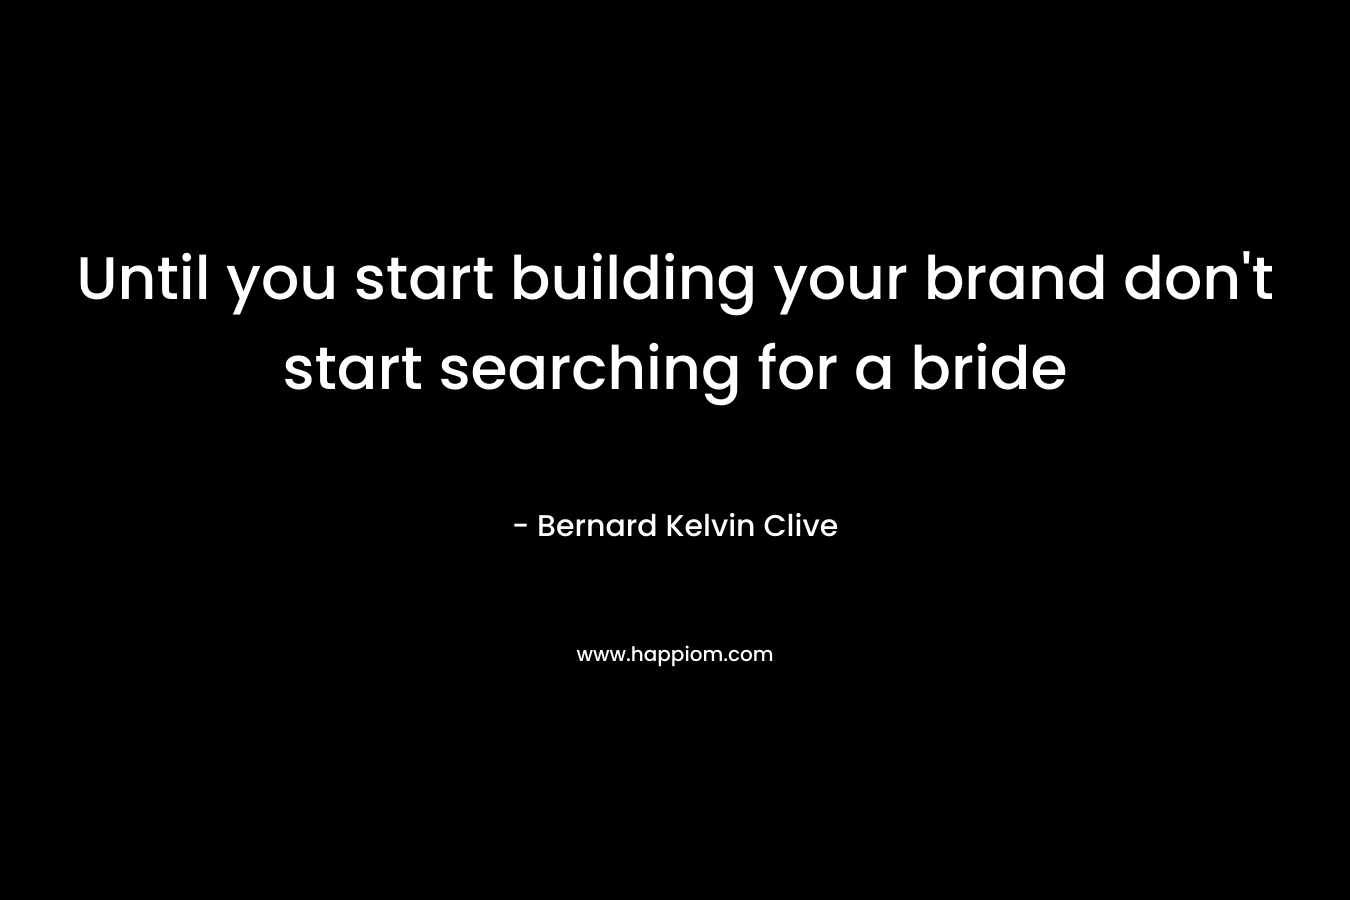 Until you start building your brand don't start searching for a bride